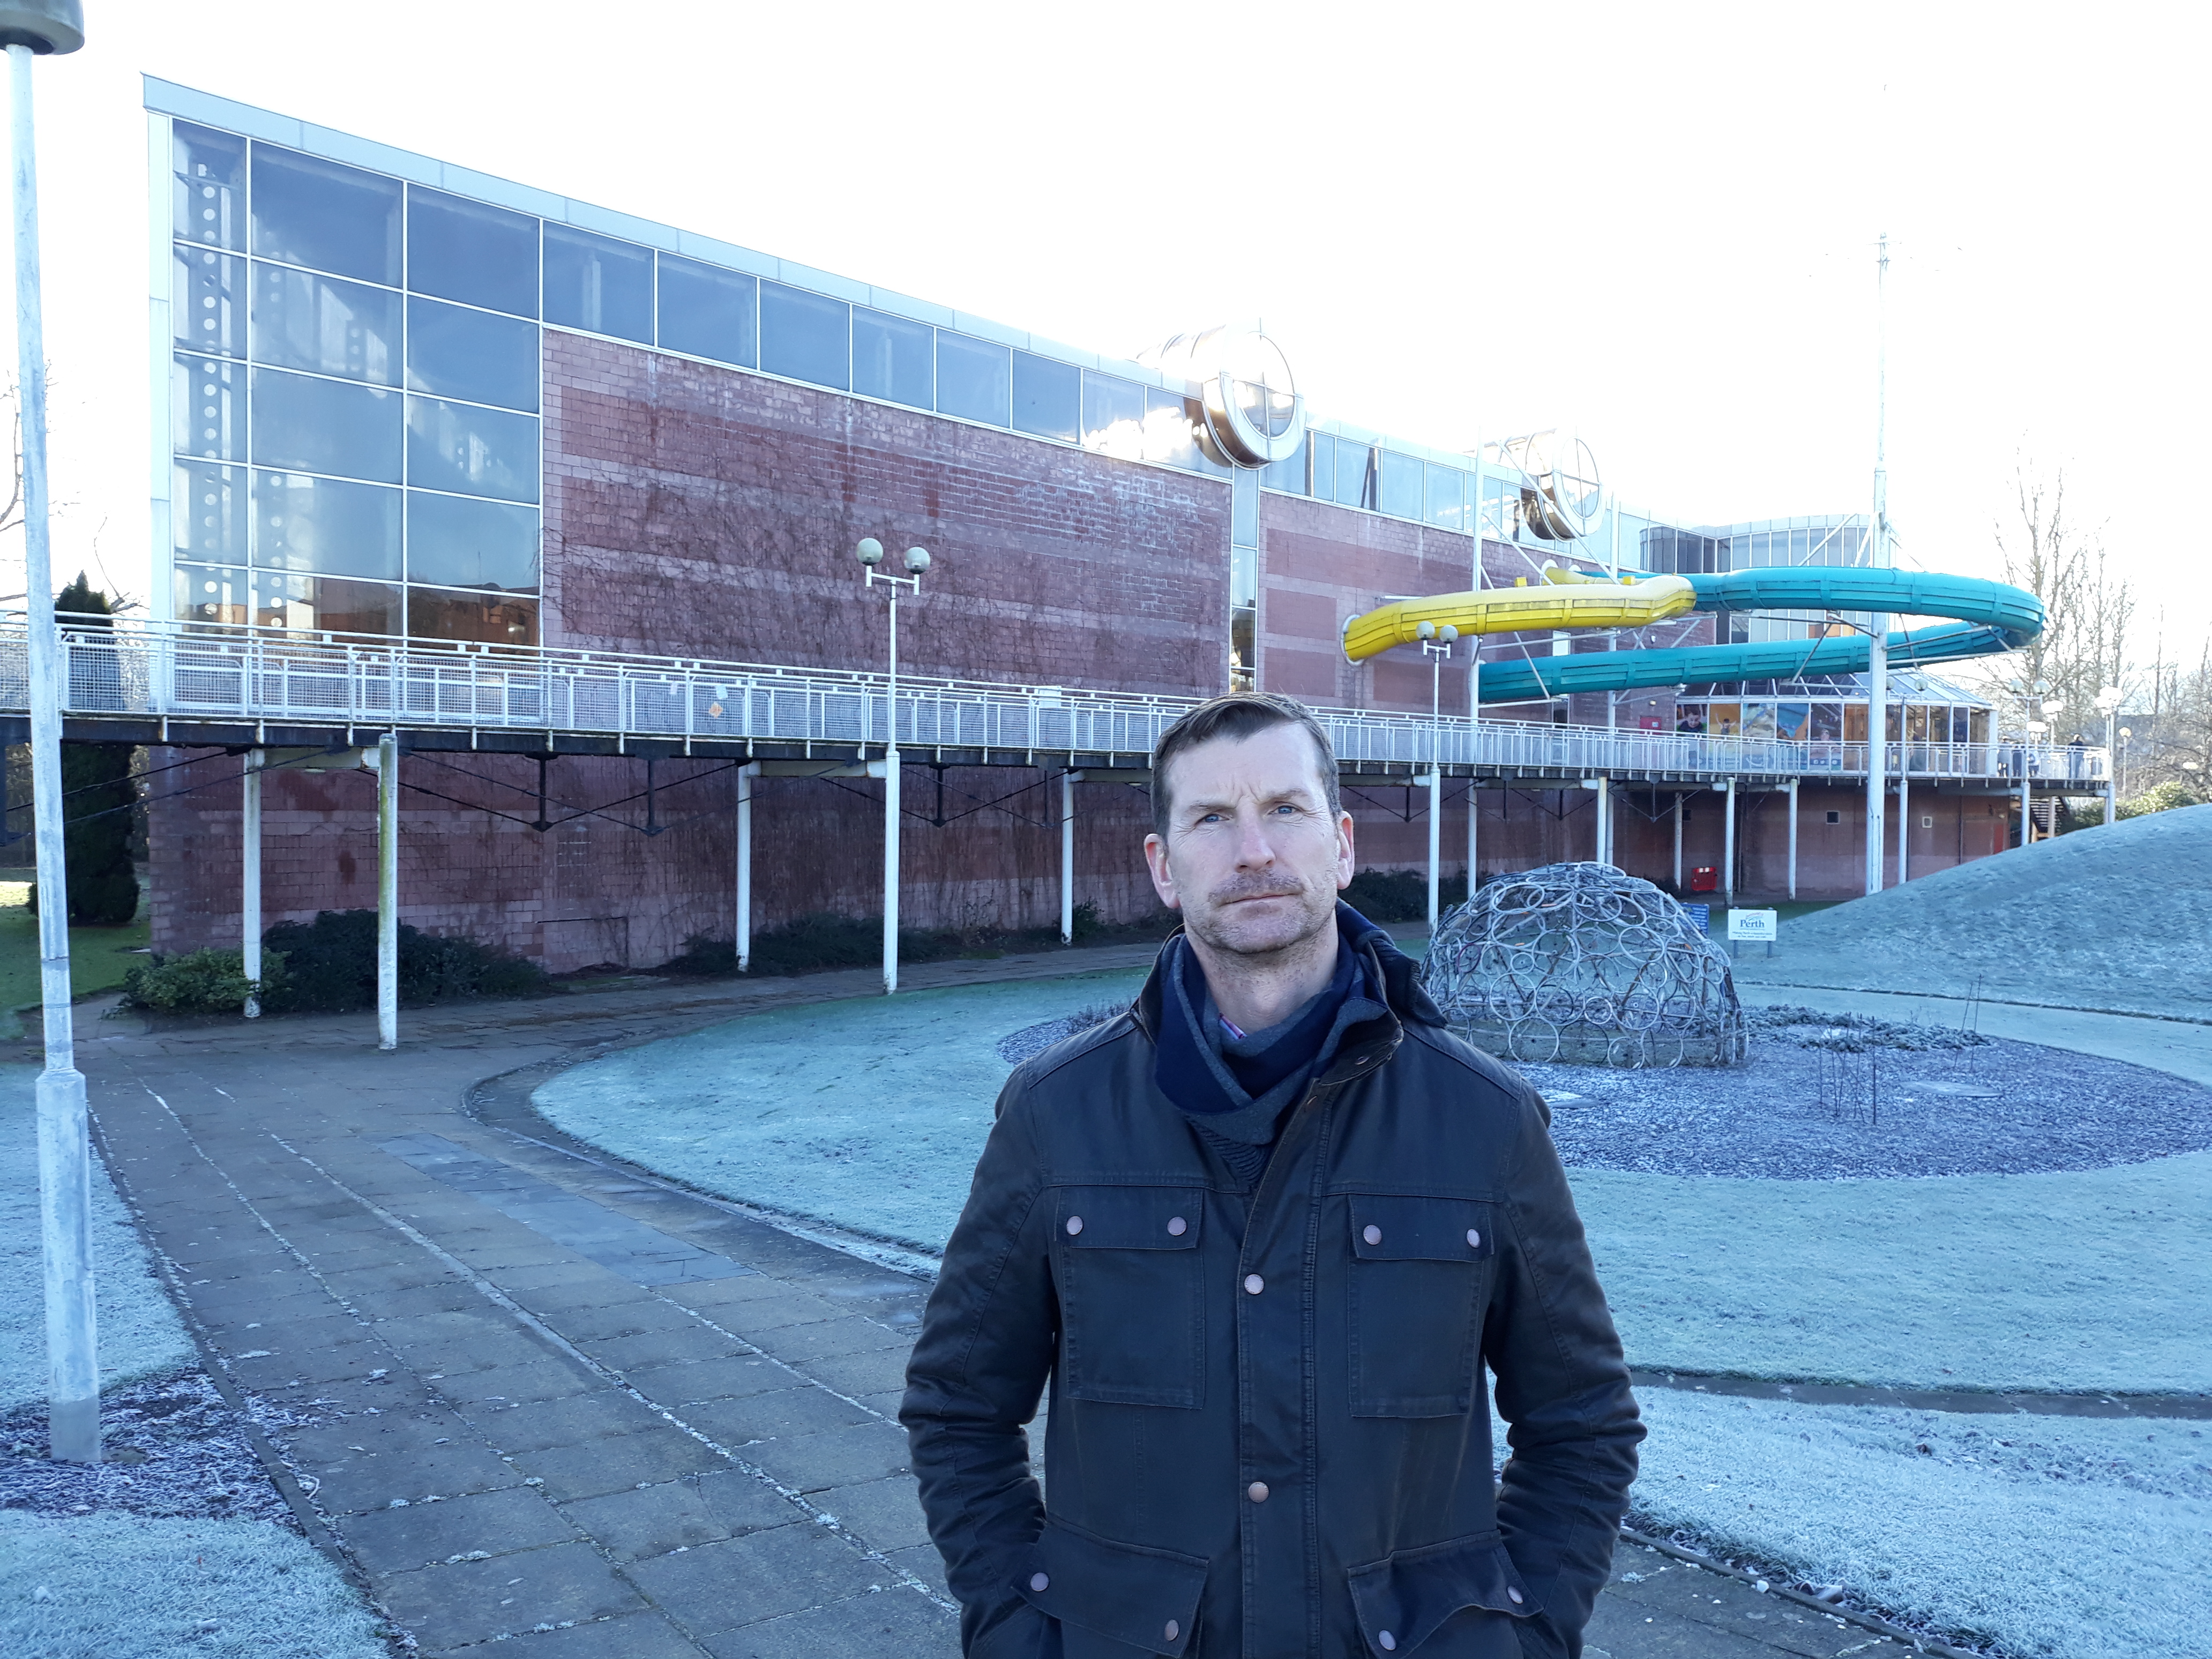 Perth and Kinross Council's SNP group leader Dave Doogan wants to see Perth Leisure Pool renovated.